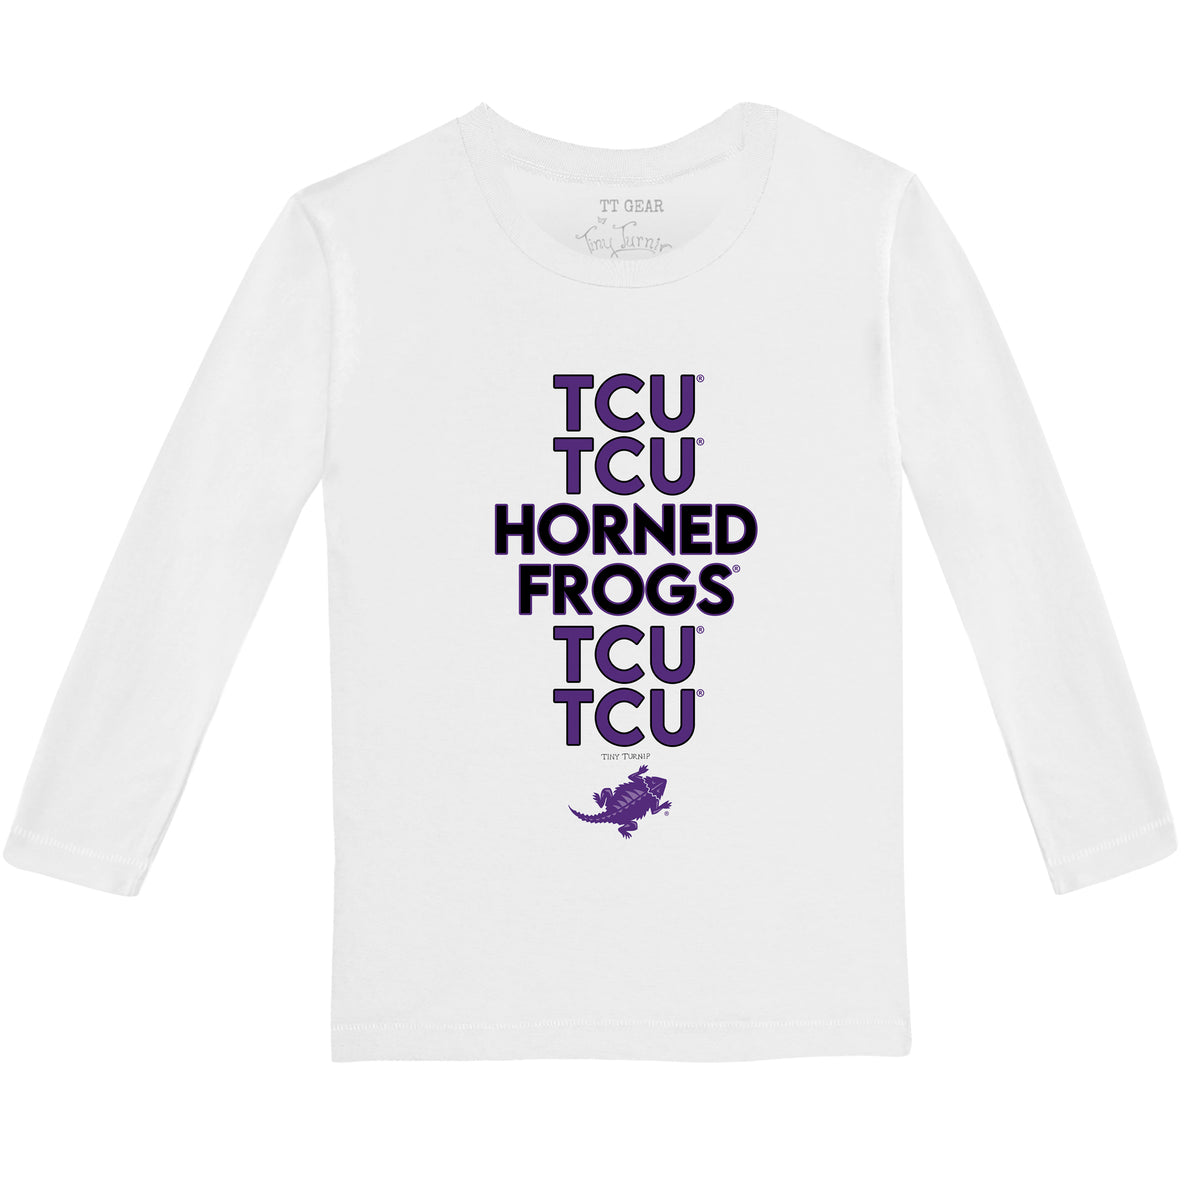 TCU Horned Frogs Stacked Long-Sleeve Tee Shirt